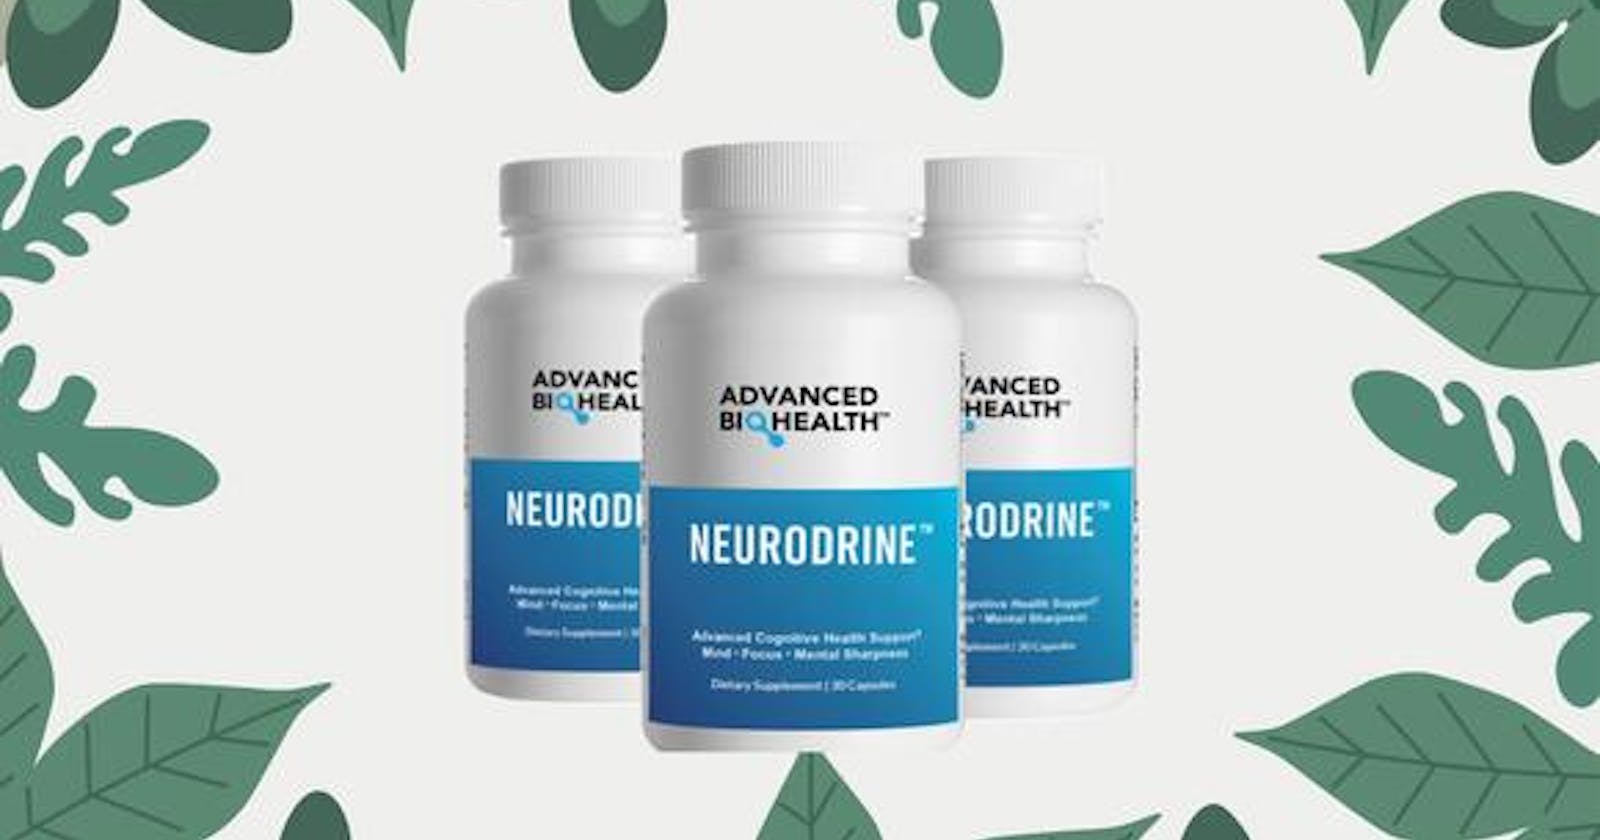 Neurodrine |#EXCITING NEWS|: Get *Effective Results at *Very Low Prices!!